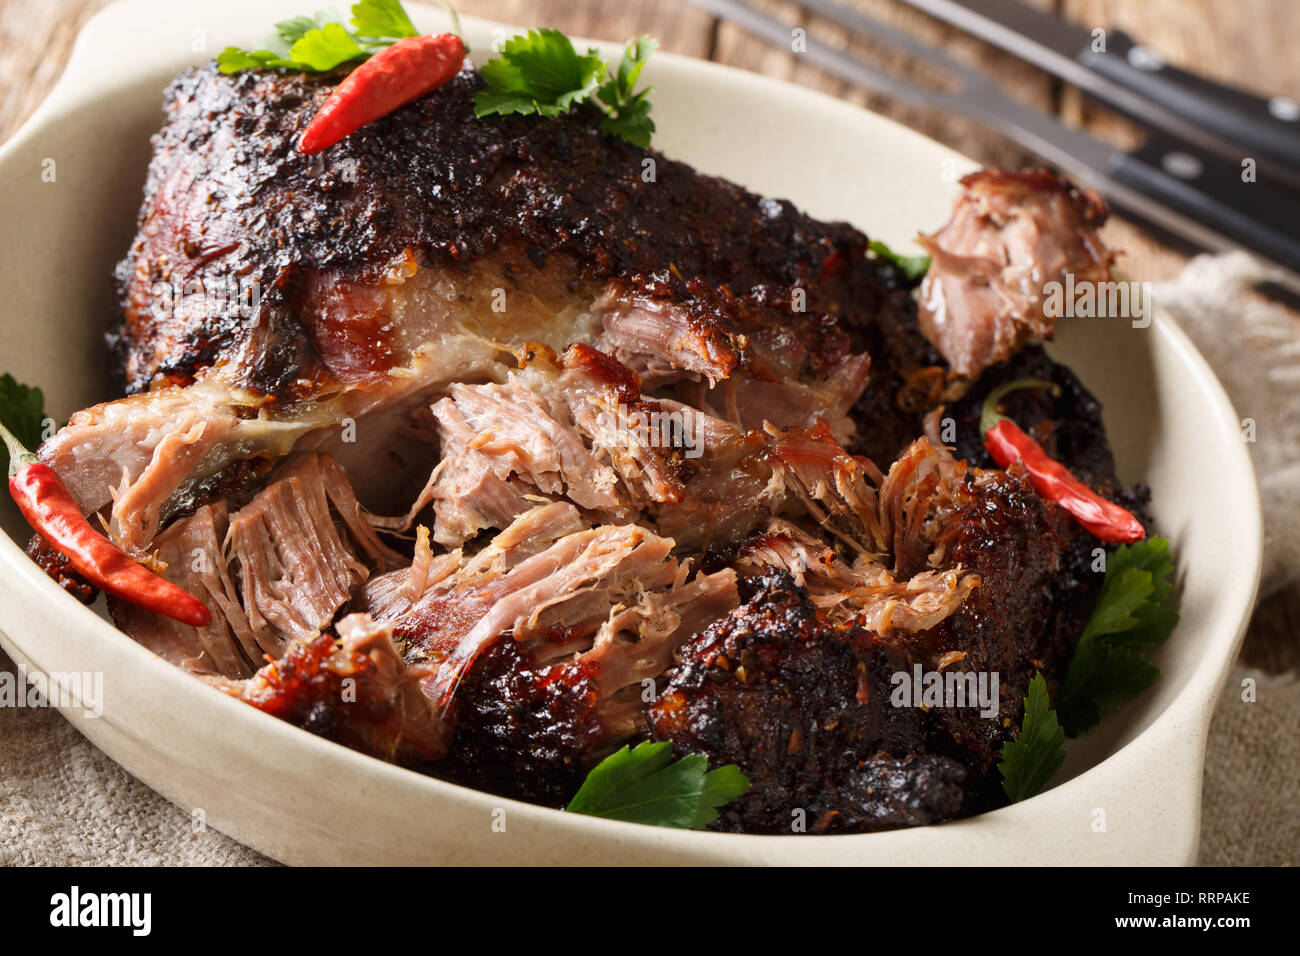 American food Pernil Asado shredded pulled pork closeup on a plate on the table. horizontal Stock Photo